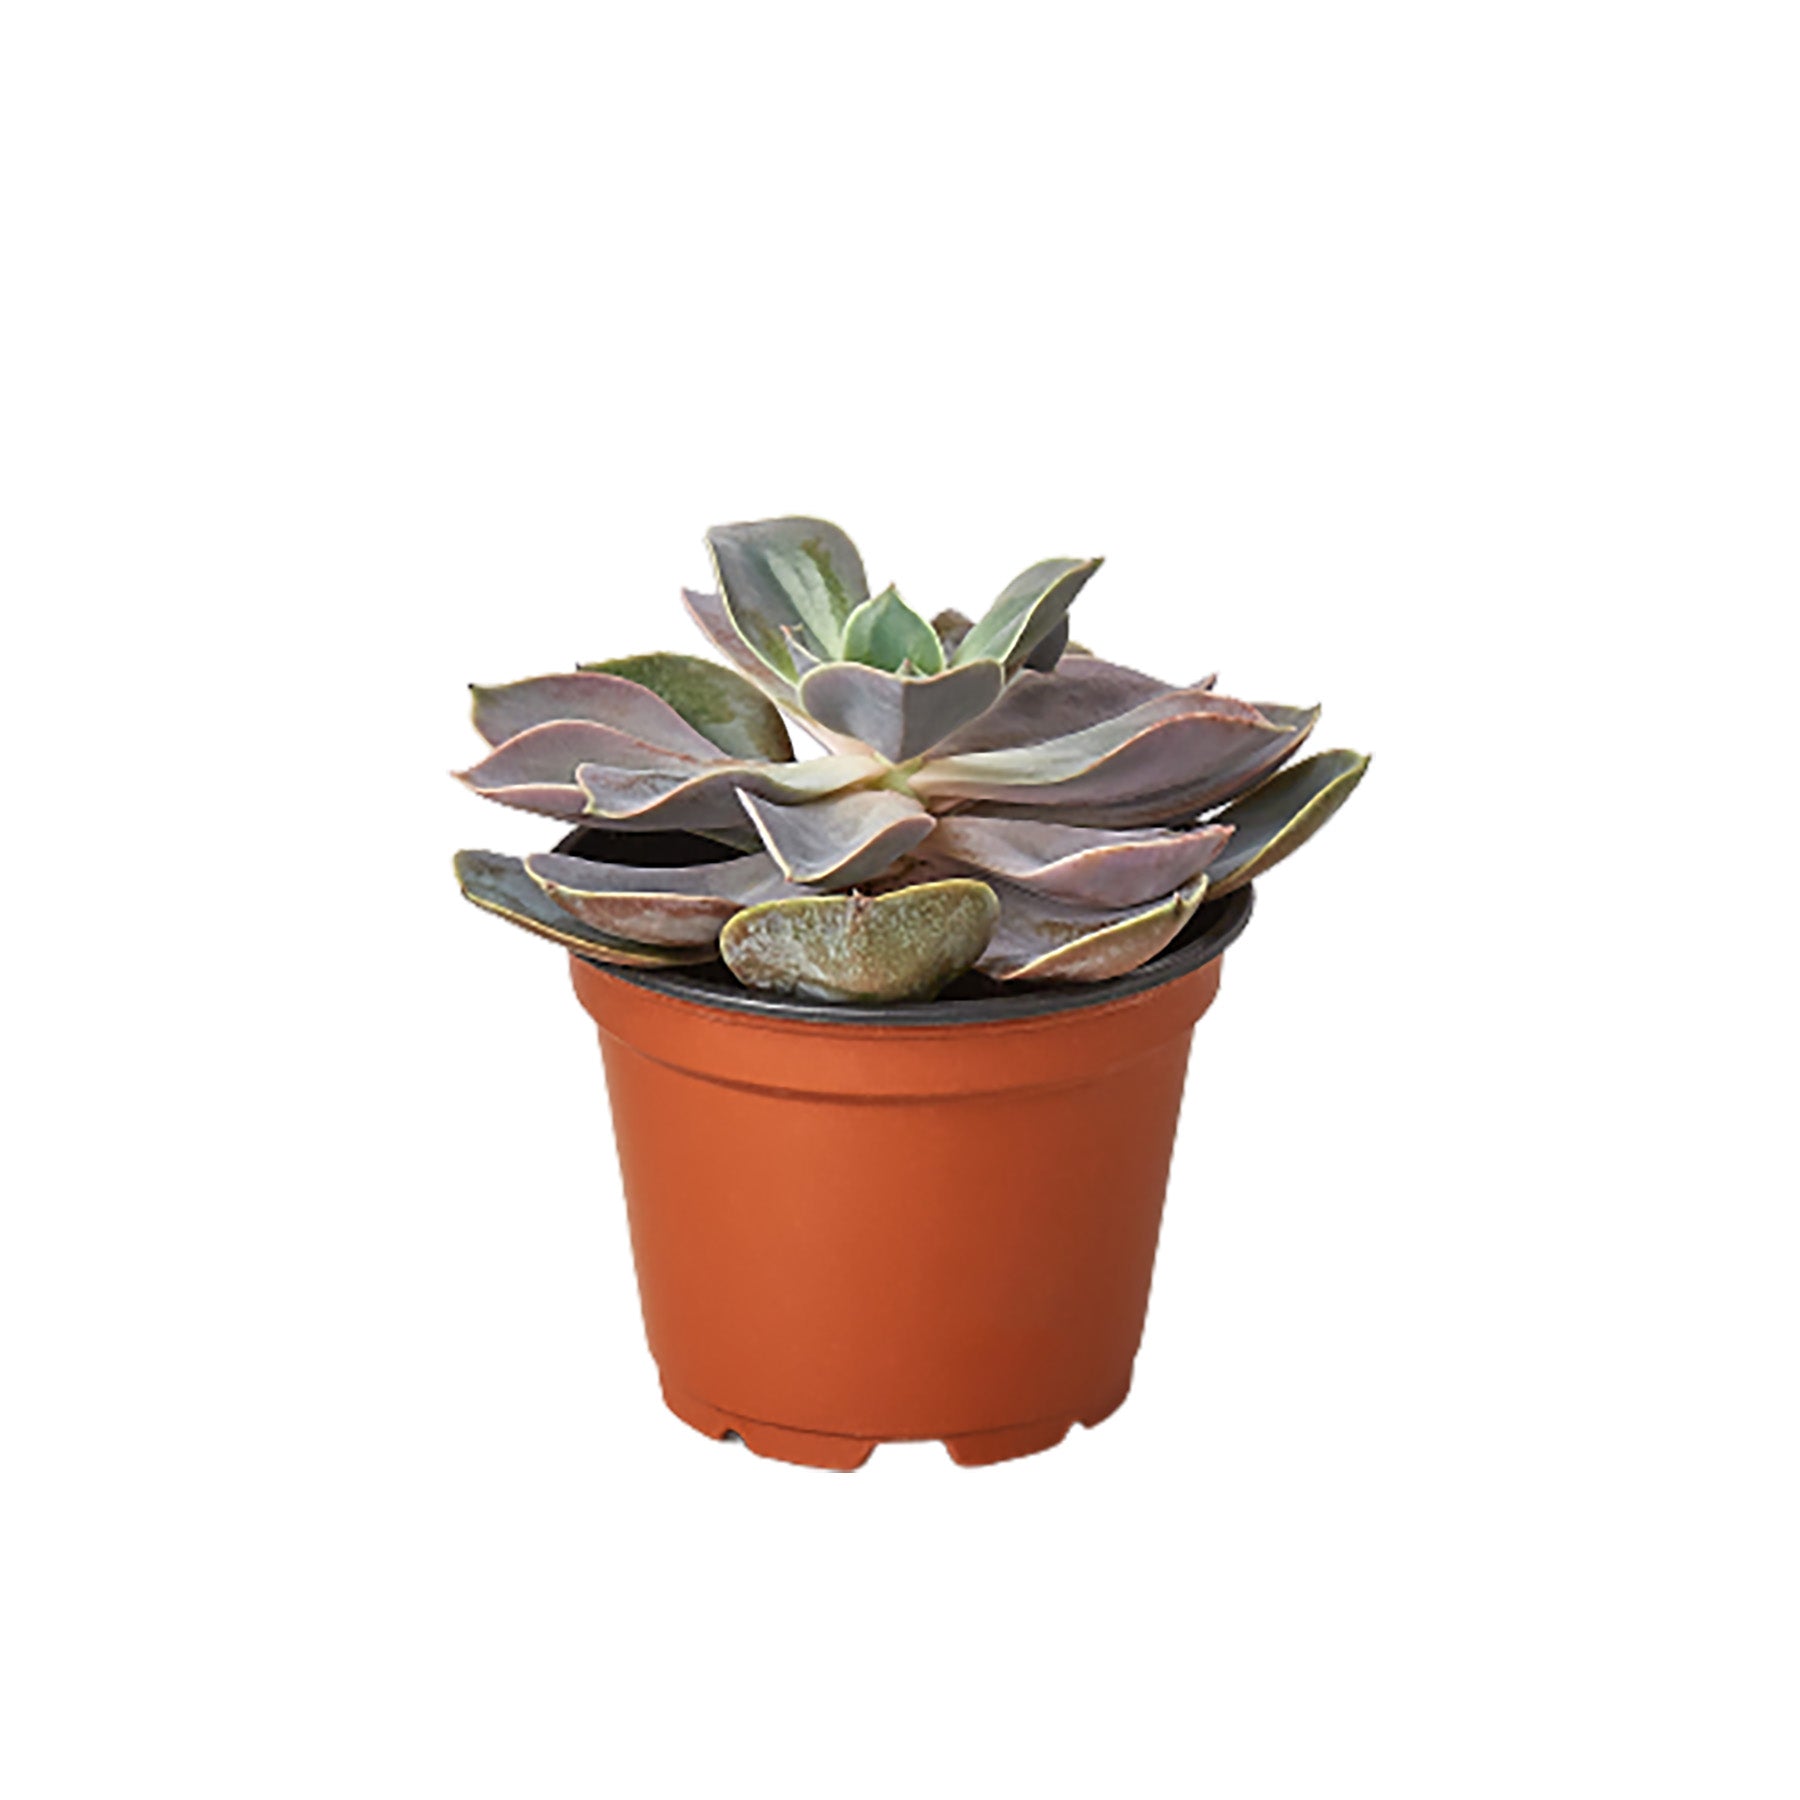 A succulent plant in a pot on a white background, obtained from the best plant nursery near me.